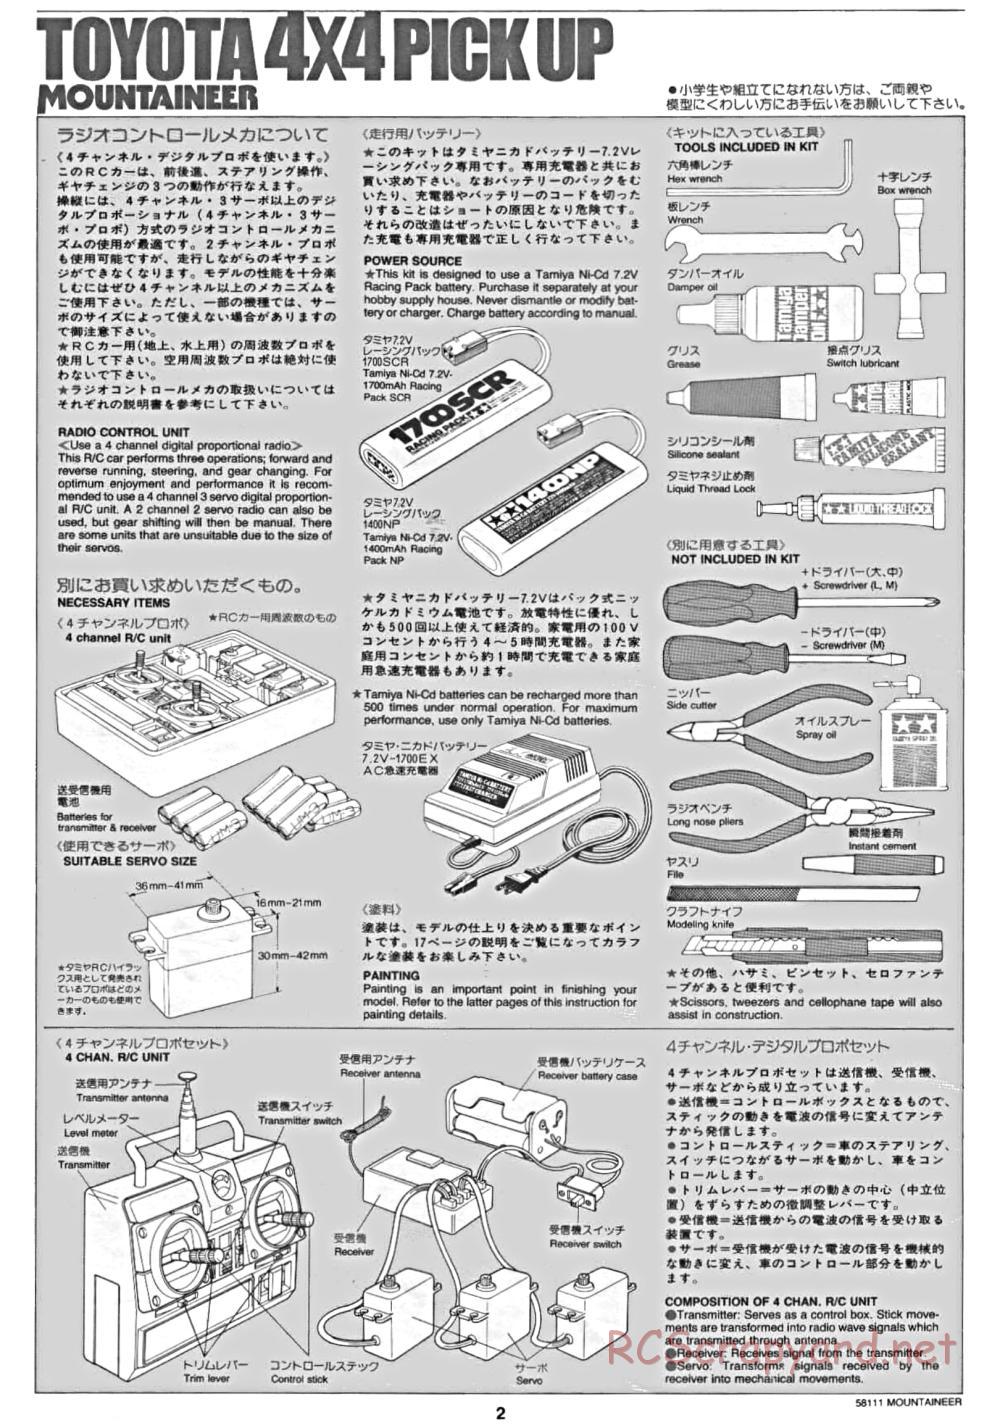 Tamiya - Toyota 4x4 Pick Up Mountaineer Chassis - Manual - Page 2